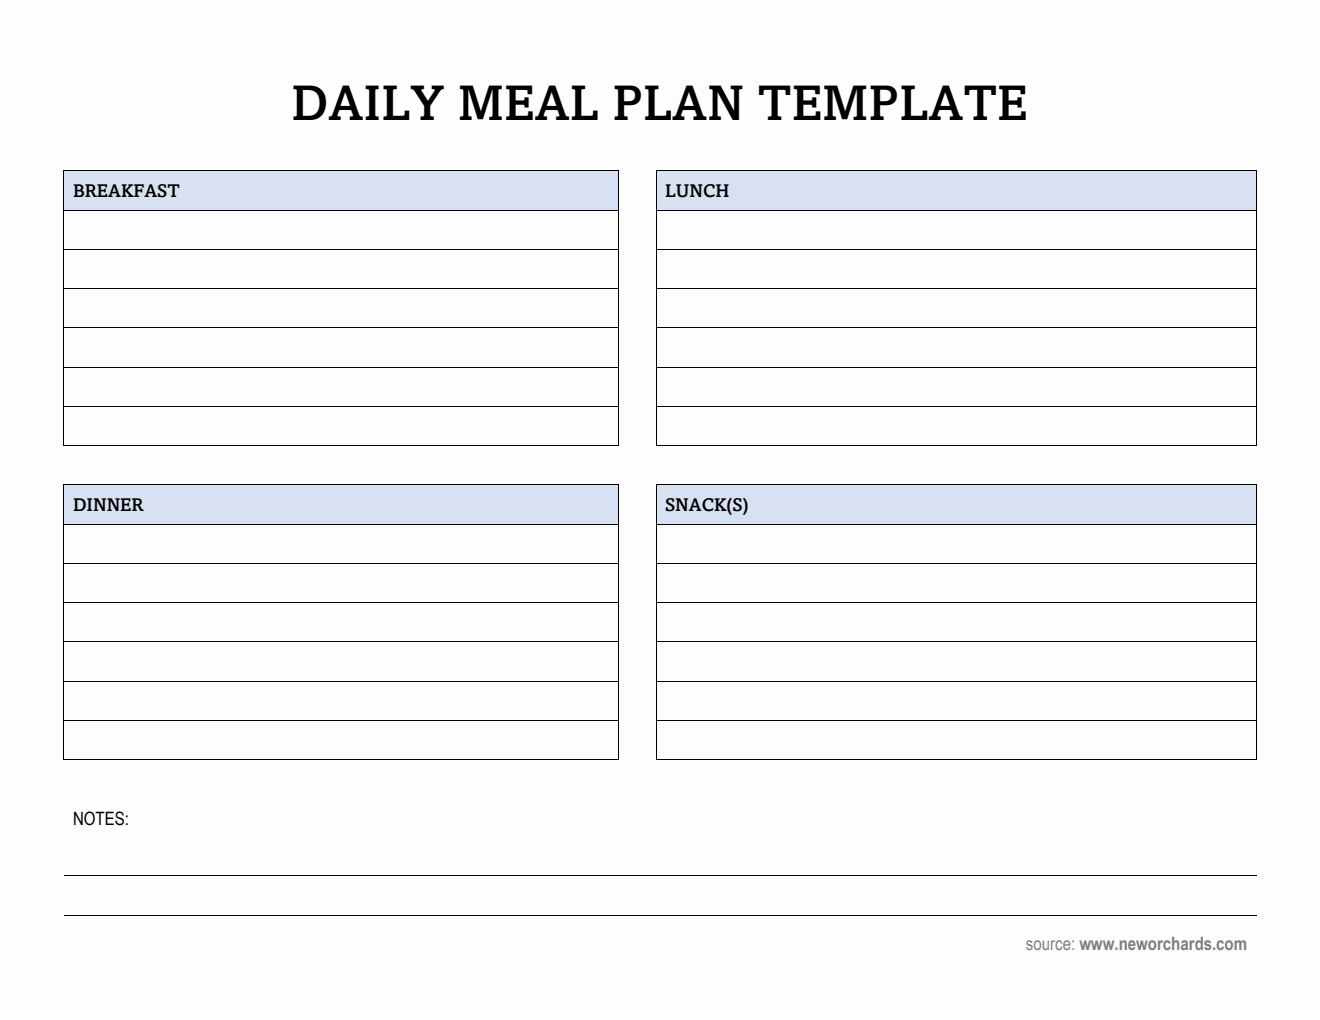 Editable Daily Meal Plan Template in Word